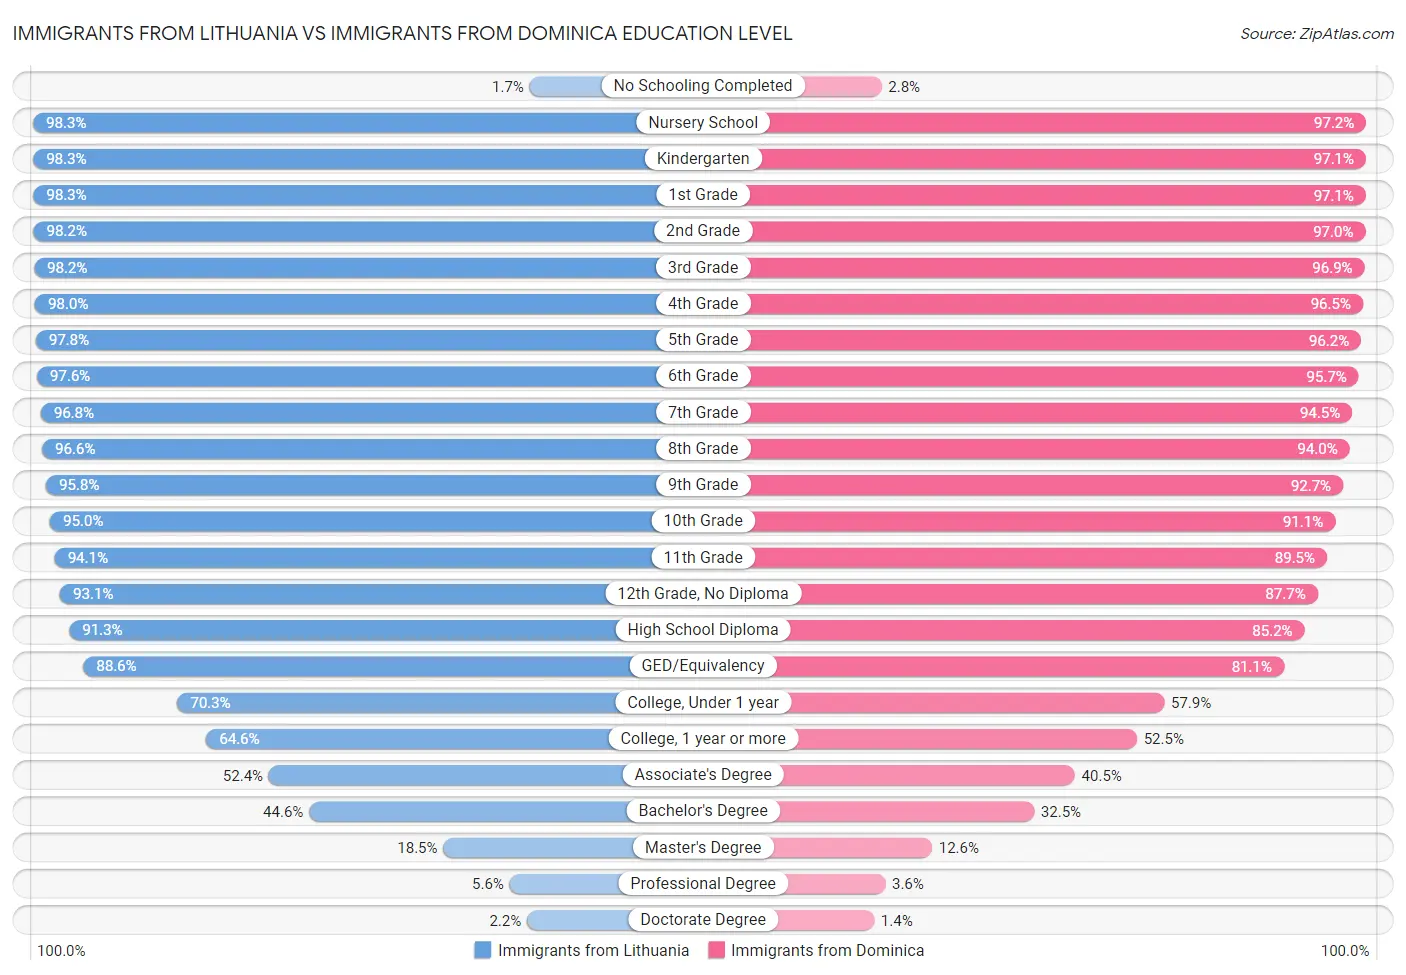 Immigrants from Lithuania vs Immigrants from Dominica Education Level